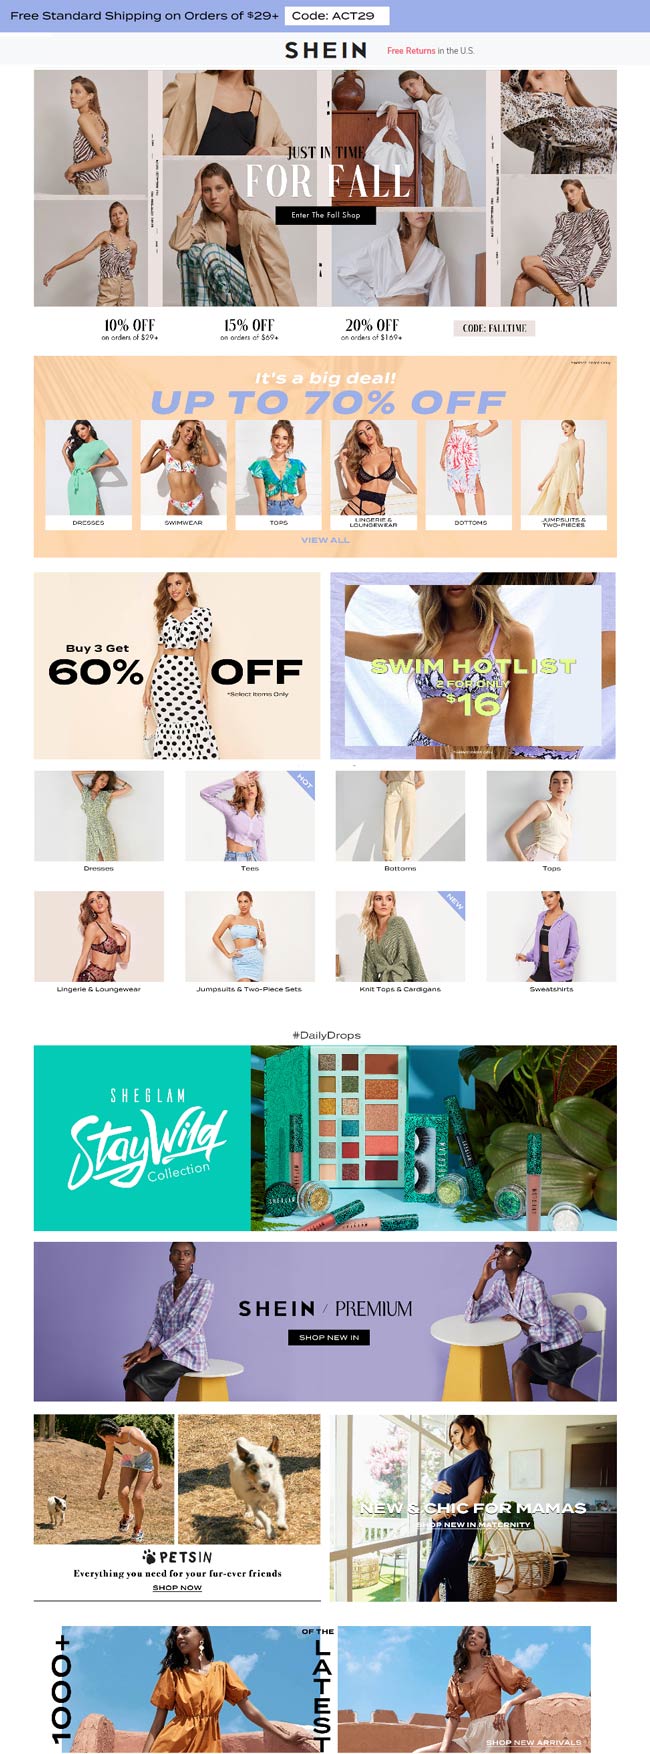 SHEIN stores Coupon  10-20% off $29+ with free shipping at SHEIN fashion, auto-promo enabled tap promo code button to try now #shein 